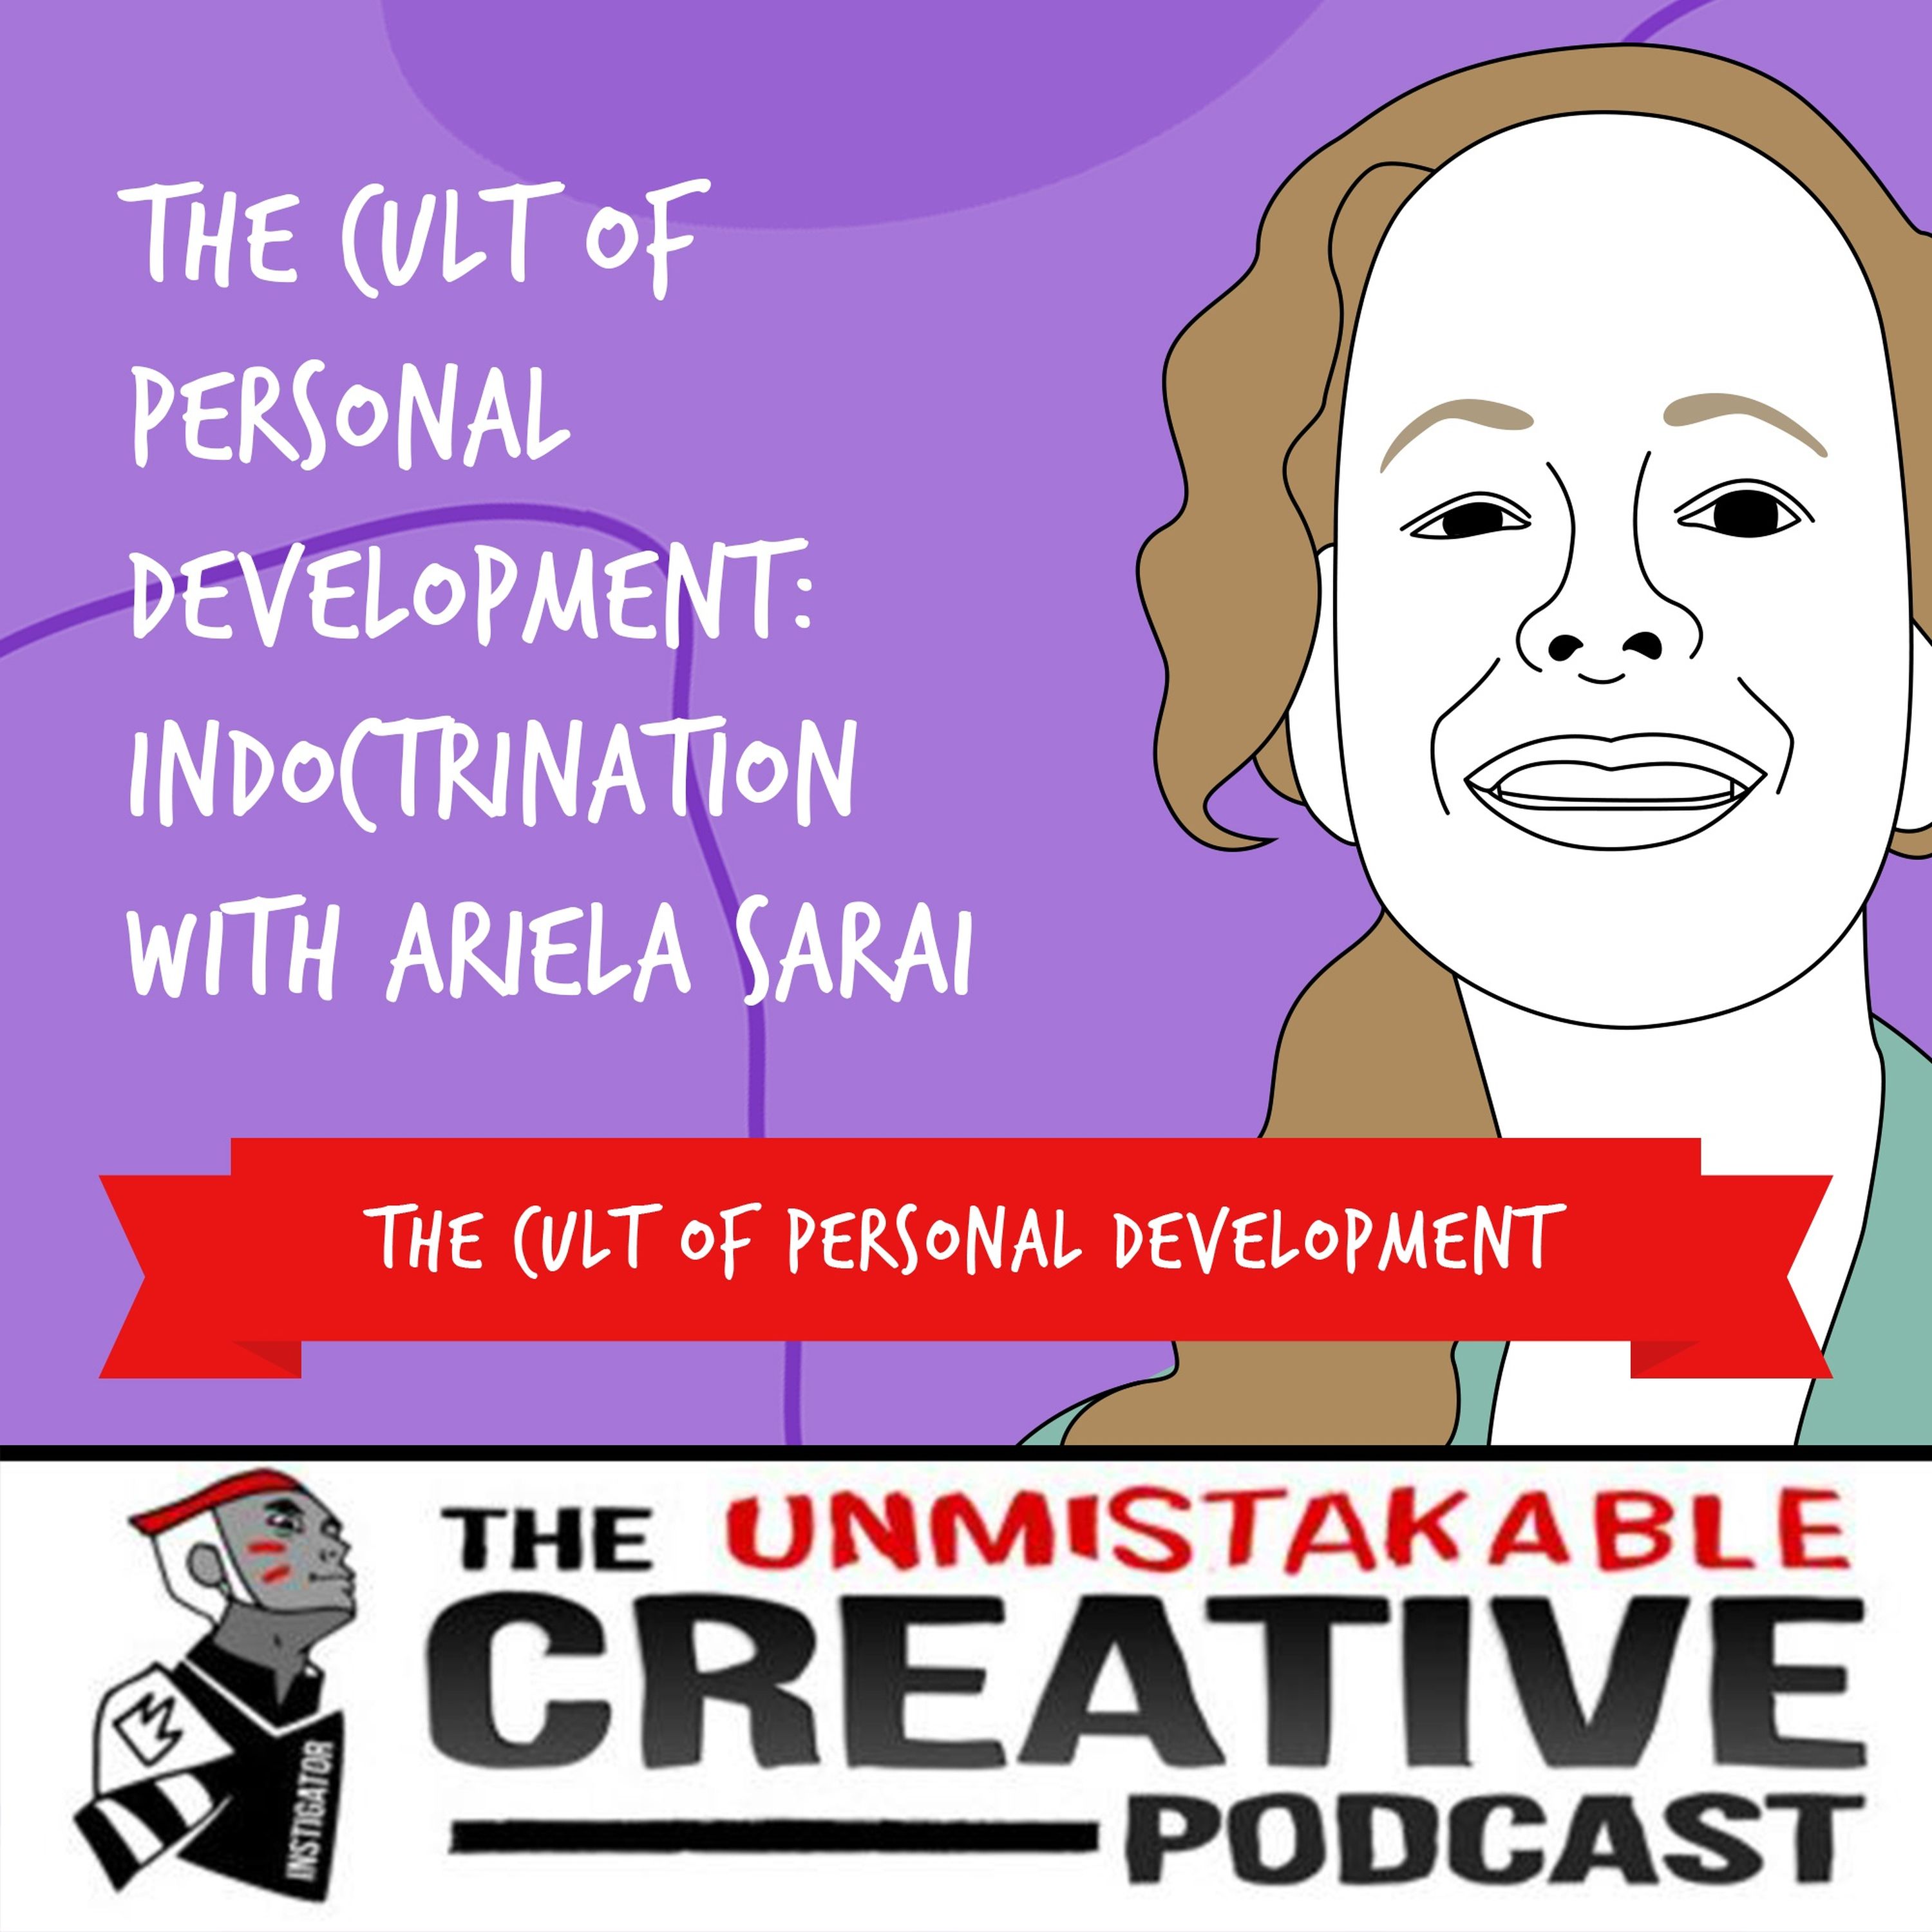 The Cult of Personal Development: Indoctrination With Ariela Sarai Image